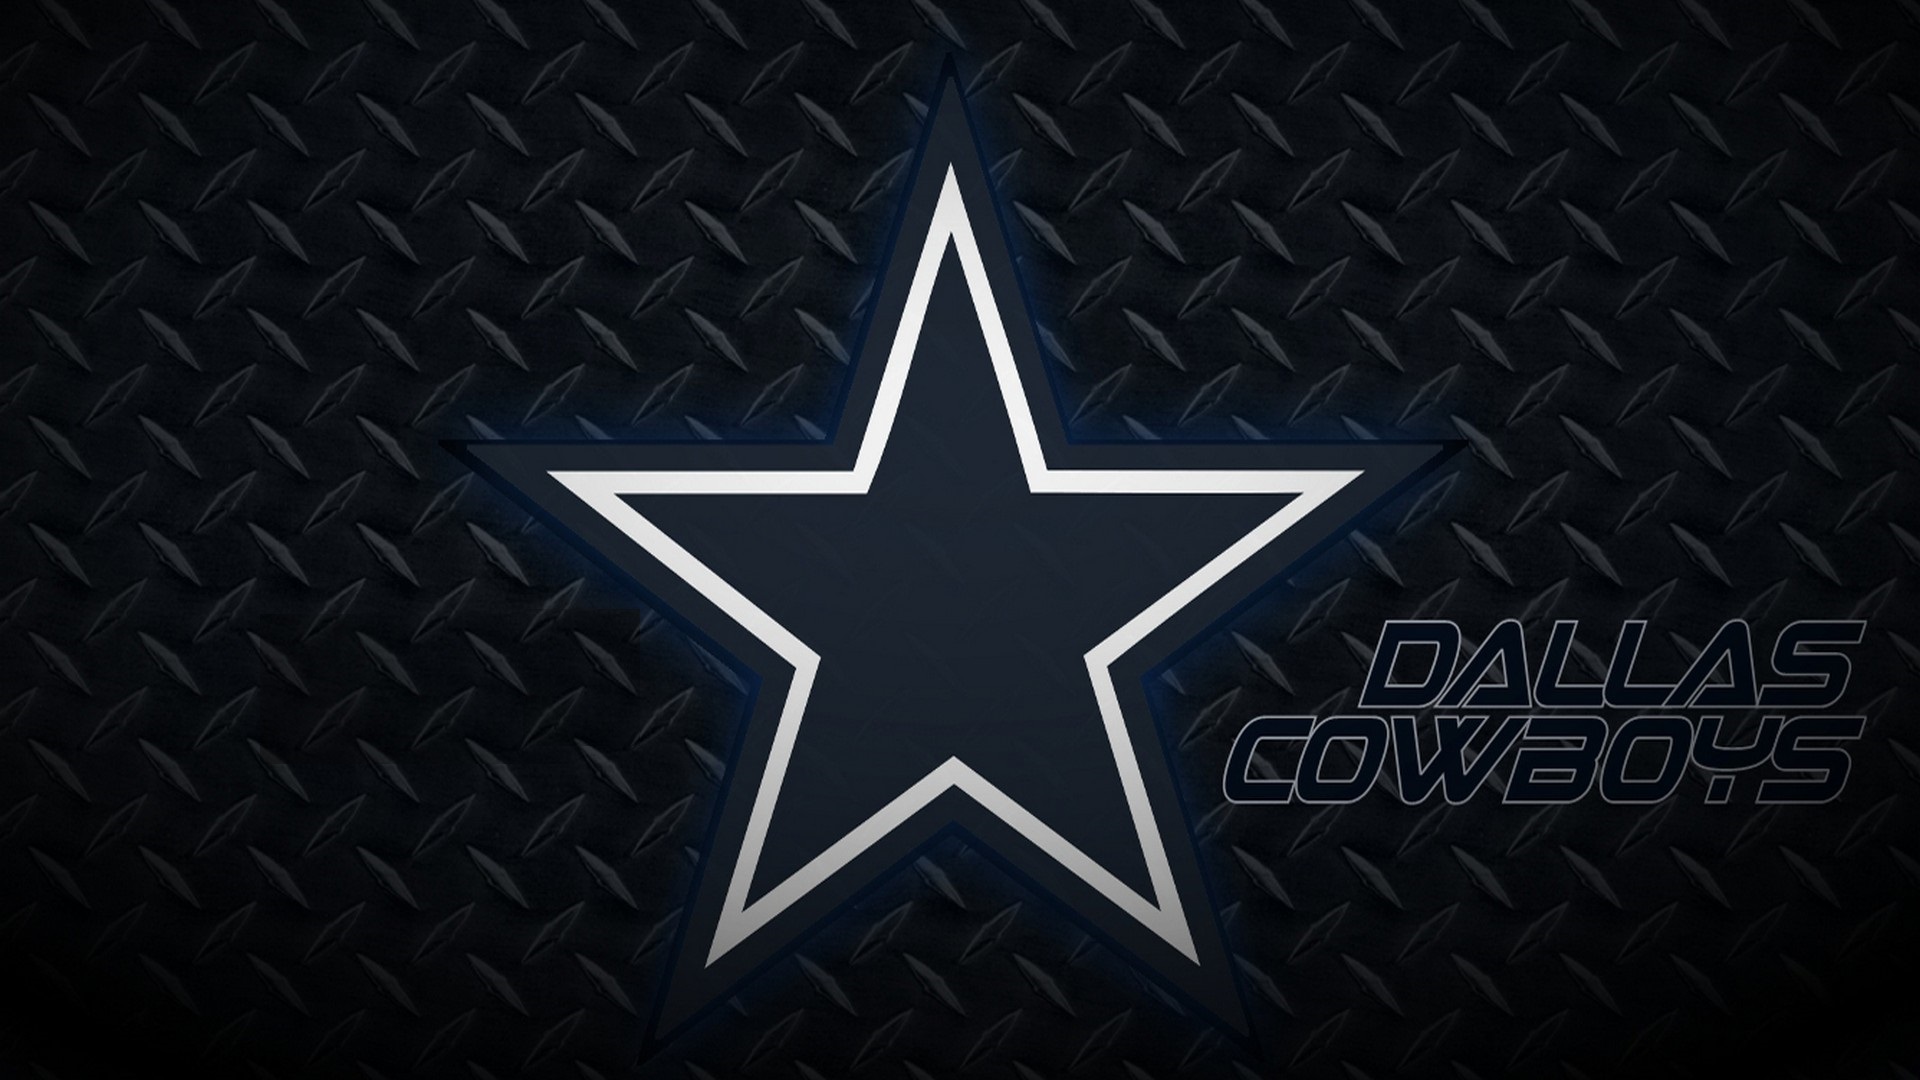 Desktop Wallpapers Dallas Cowboys with high-resolution 1920x1080 pixel. Download and set as wallpaper for Desktop Computer, Apple iPhone X, XS Max, XR, 8, 7, 6, SE, iPad, Android